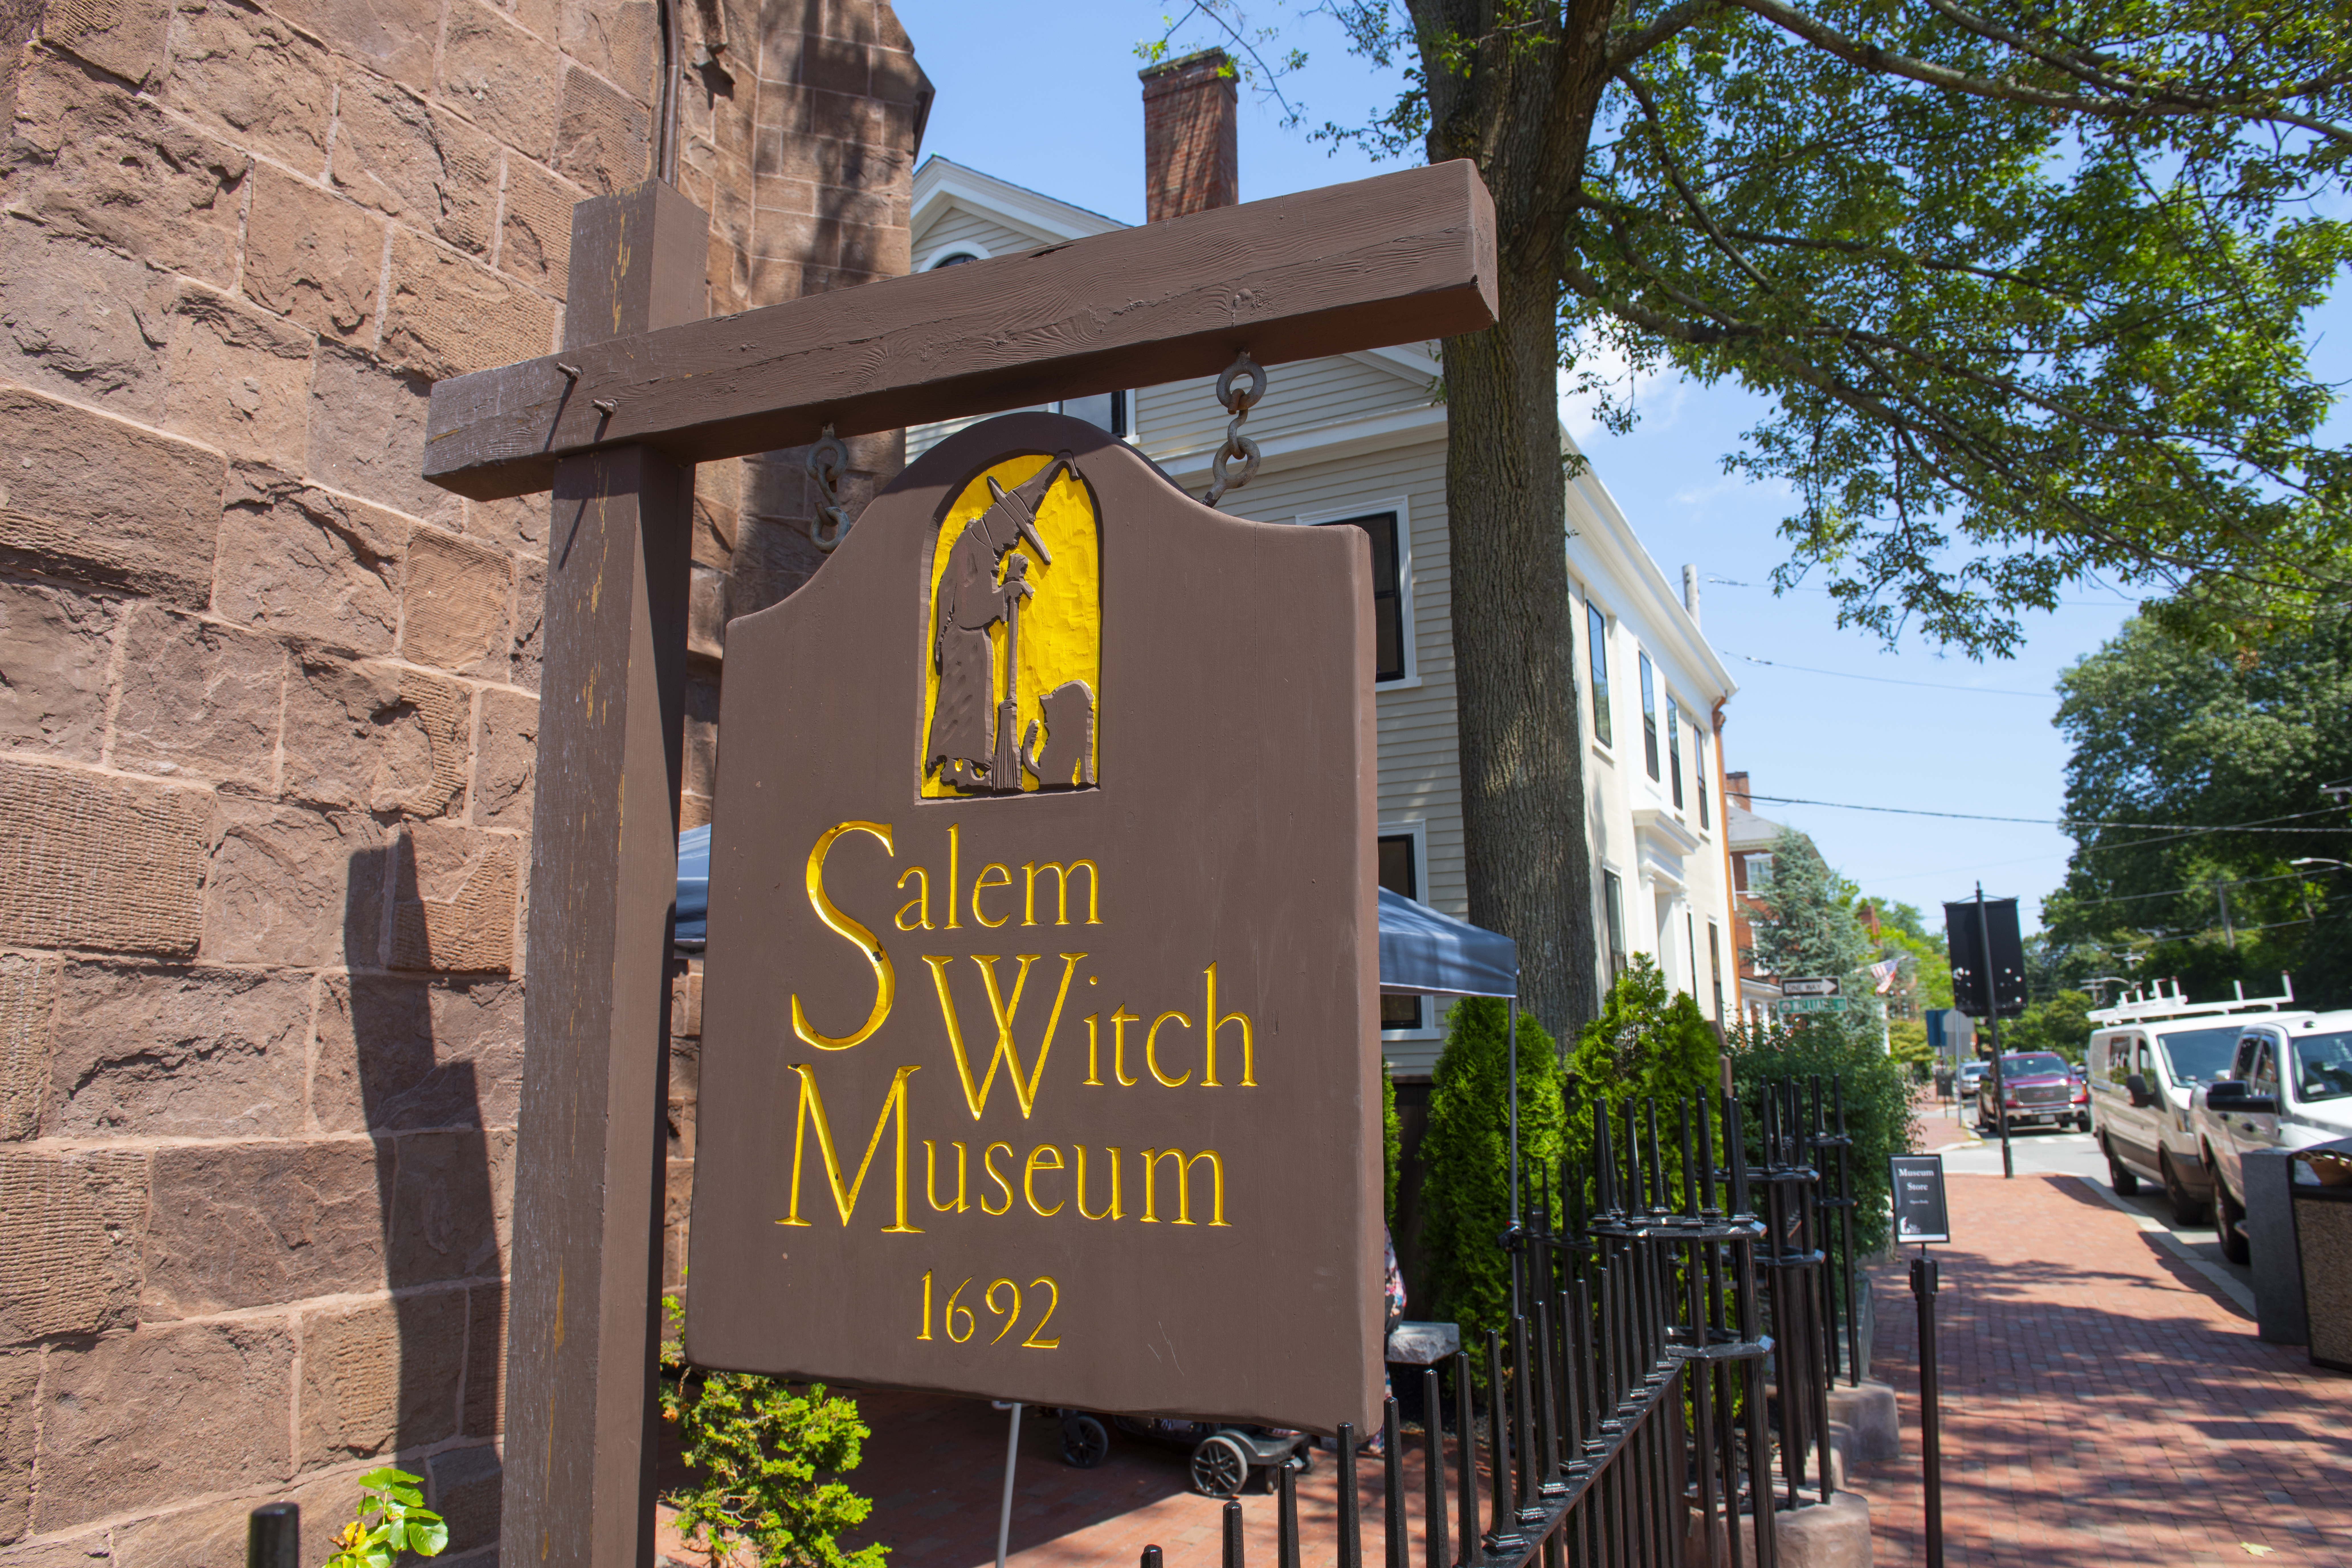 Check Out These Most Haunted Towns in America - Salem Witch Museum